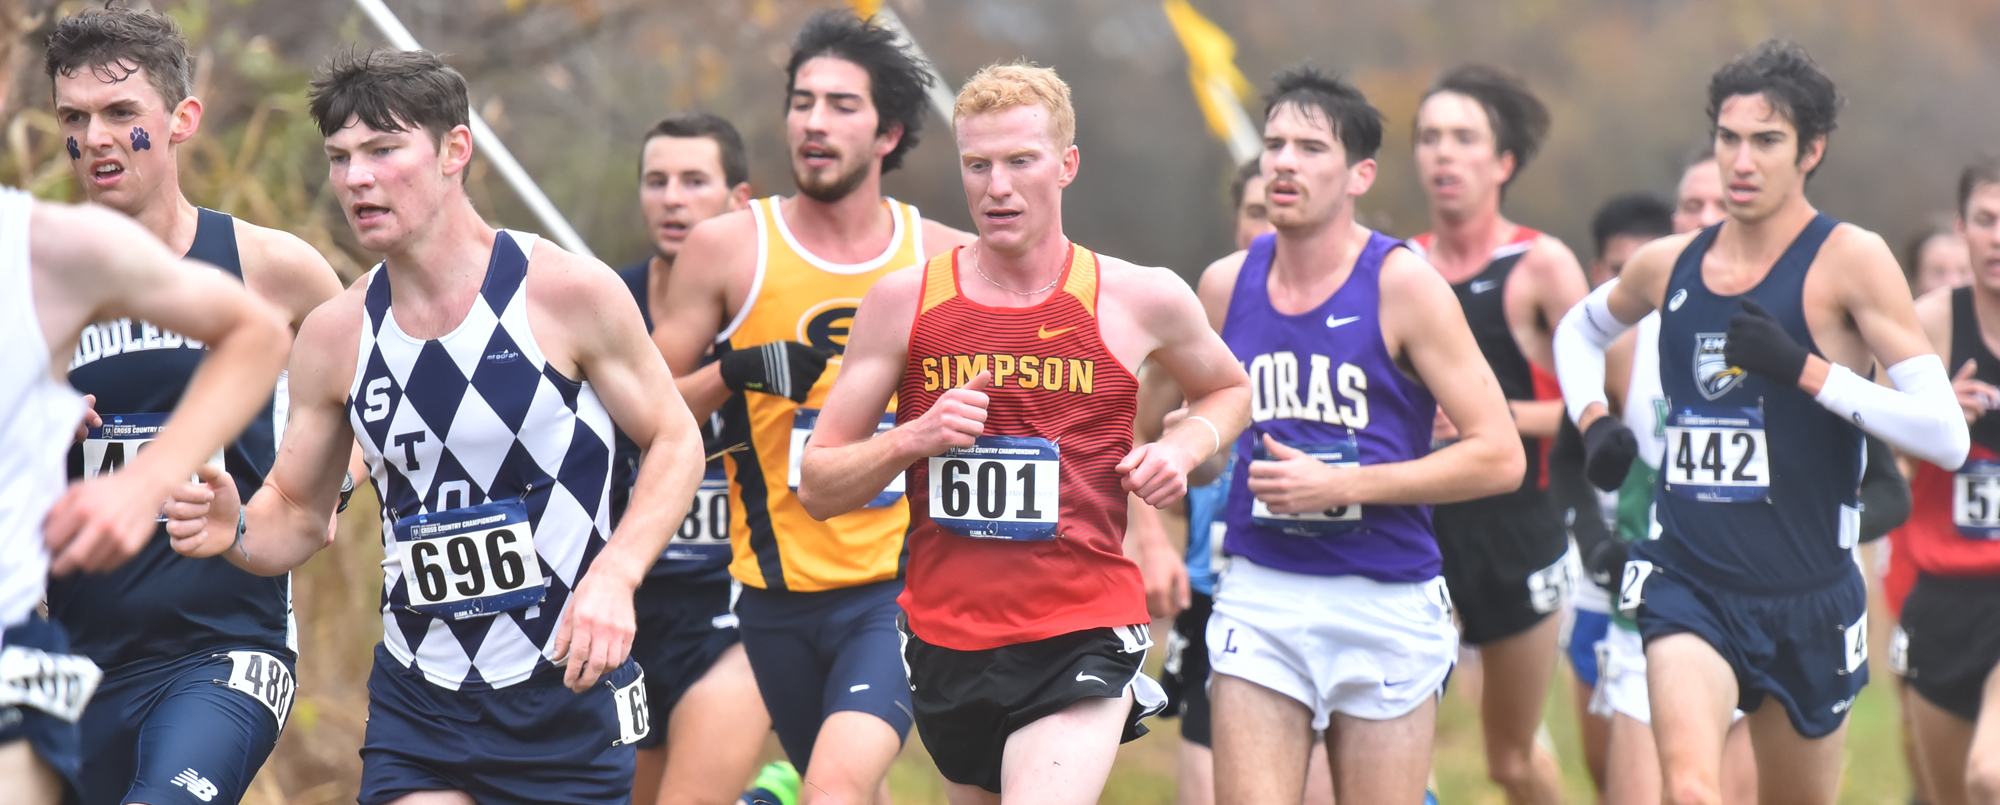 Ian Mckenzie placed 140th at the national meet on Saturday, Nov. 18, the best finish by a Storm runner since 1995.